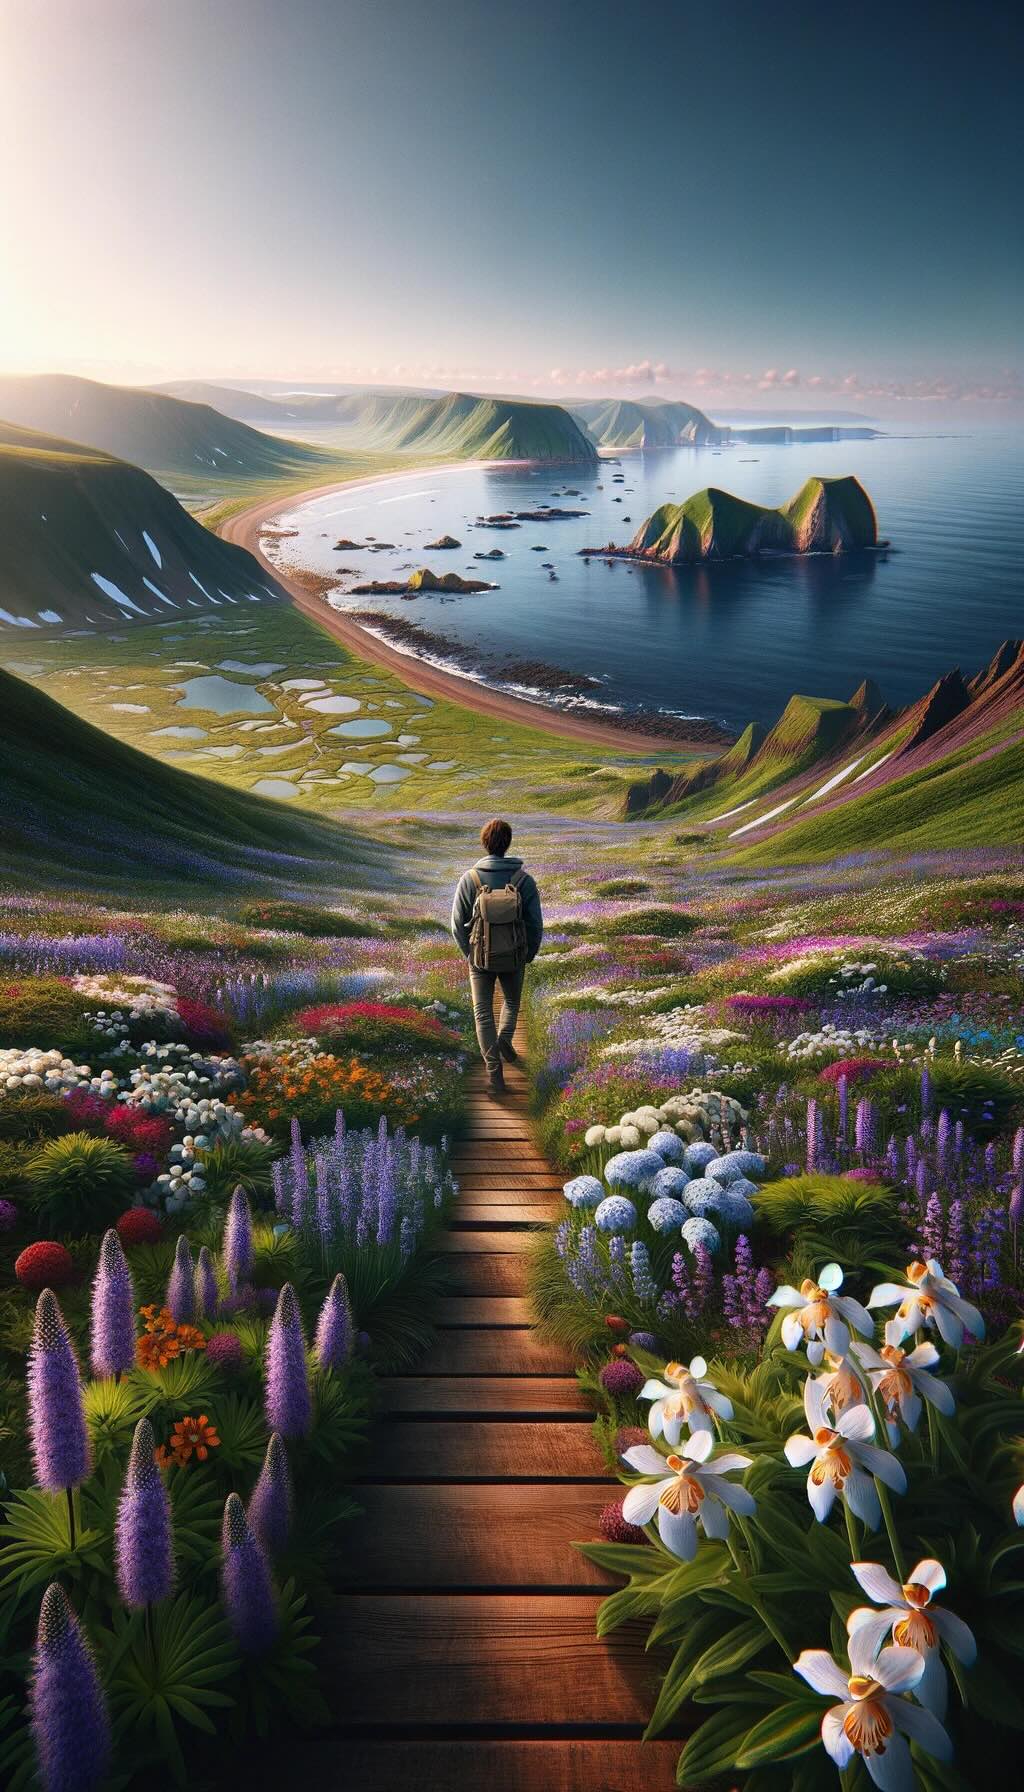 A hiker standing amidst a vibrant expanse of alpine flowers on Rebun Island, offering a phanoramic view of the Sea of Japan. Fields of lavender, edelweiss, and Rebun lady's slipper orchids create a colorful tapestry against the backdrop of the rugged coastline. The fresh, crisp air and the serene atmosphere encapsulate the island's wild beauty and tranquility. This moment of profound peace and solitude beautifully reflects the unique charm and natural splendor of Rebun Island. 